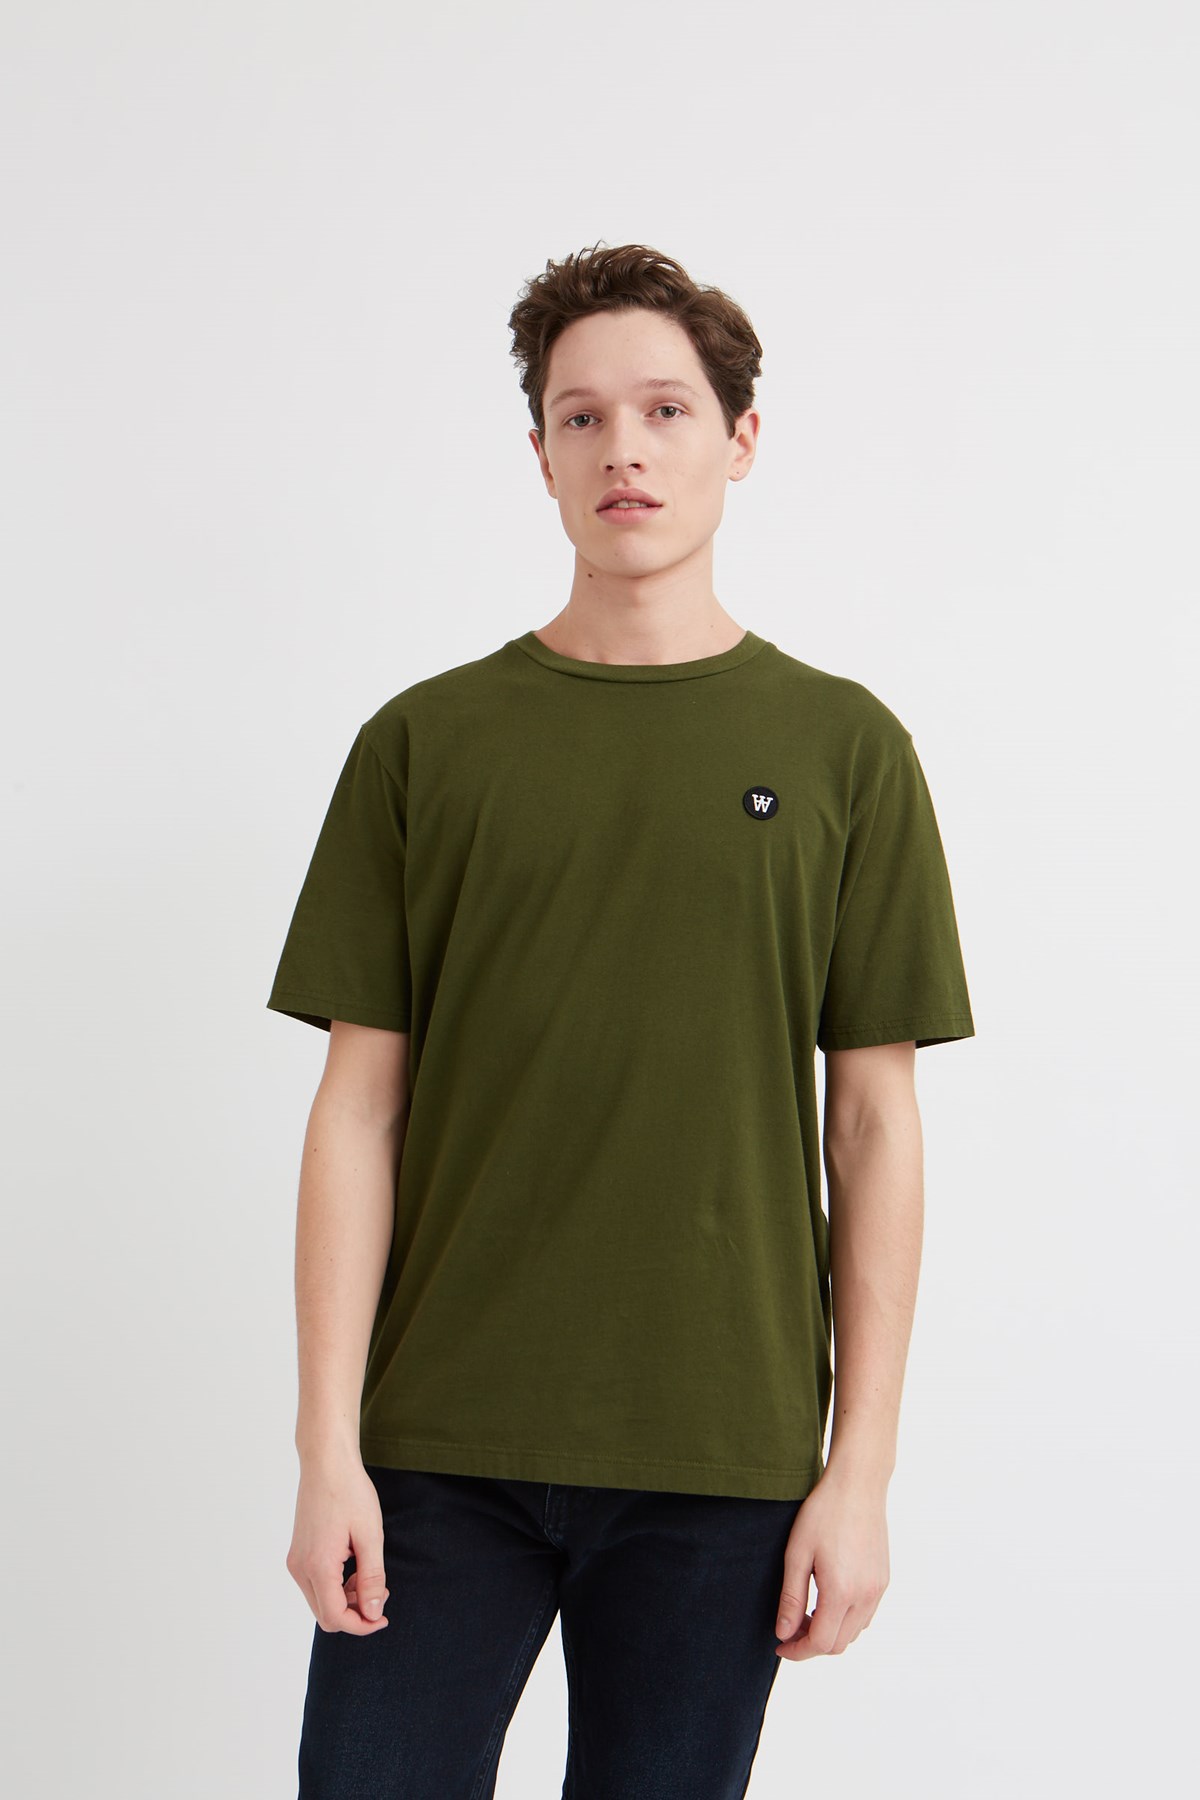 Double A by Wood Wood Ace T-shirt Army green | WoodWood.com